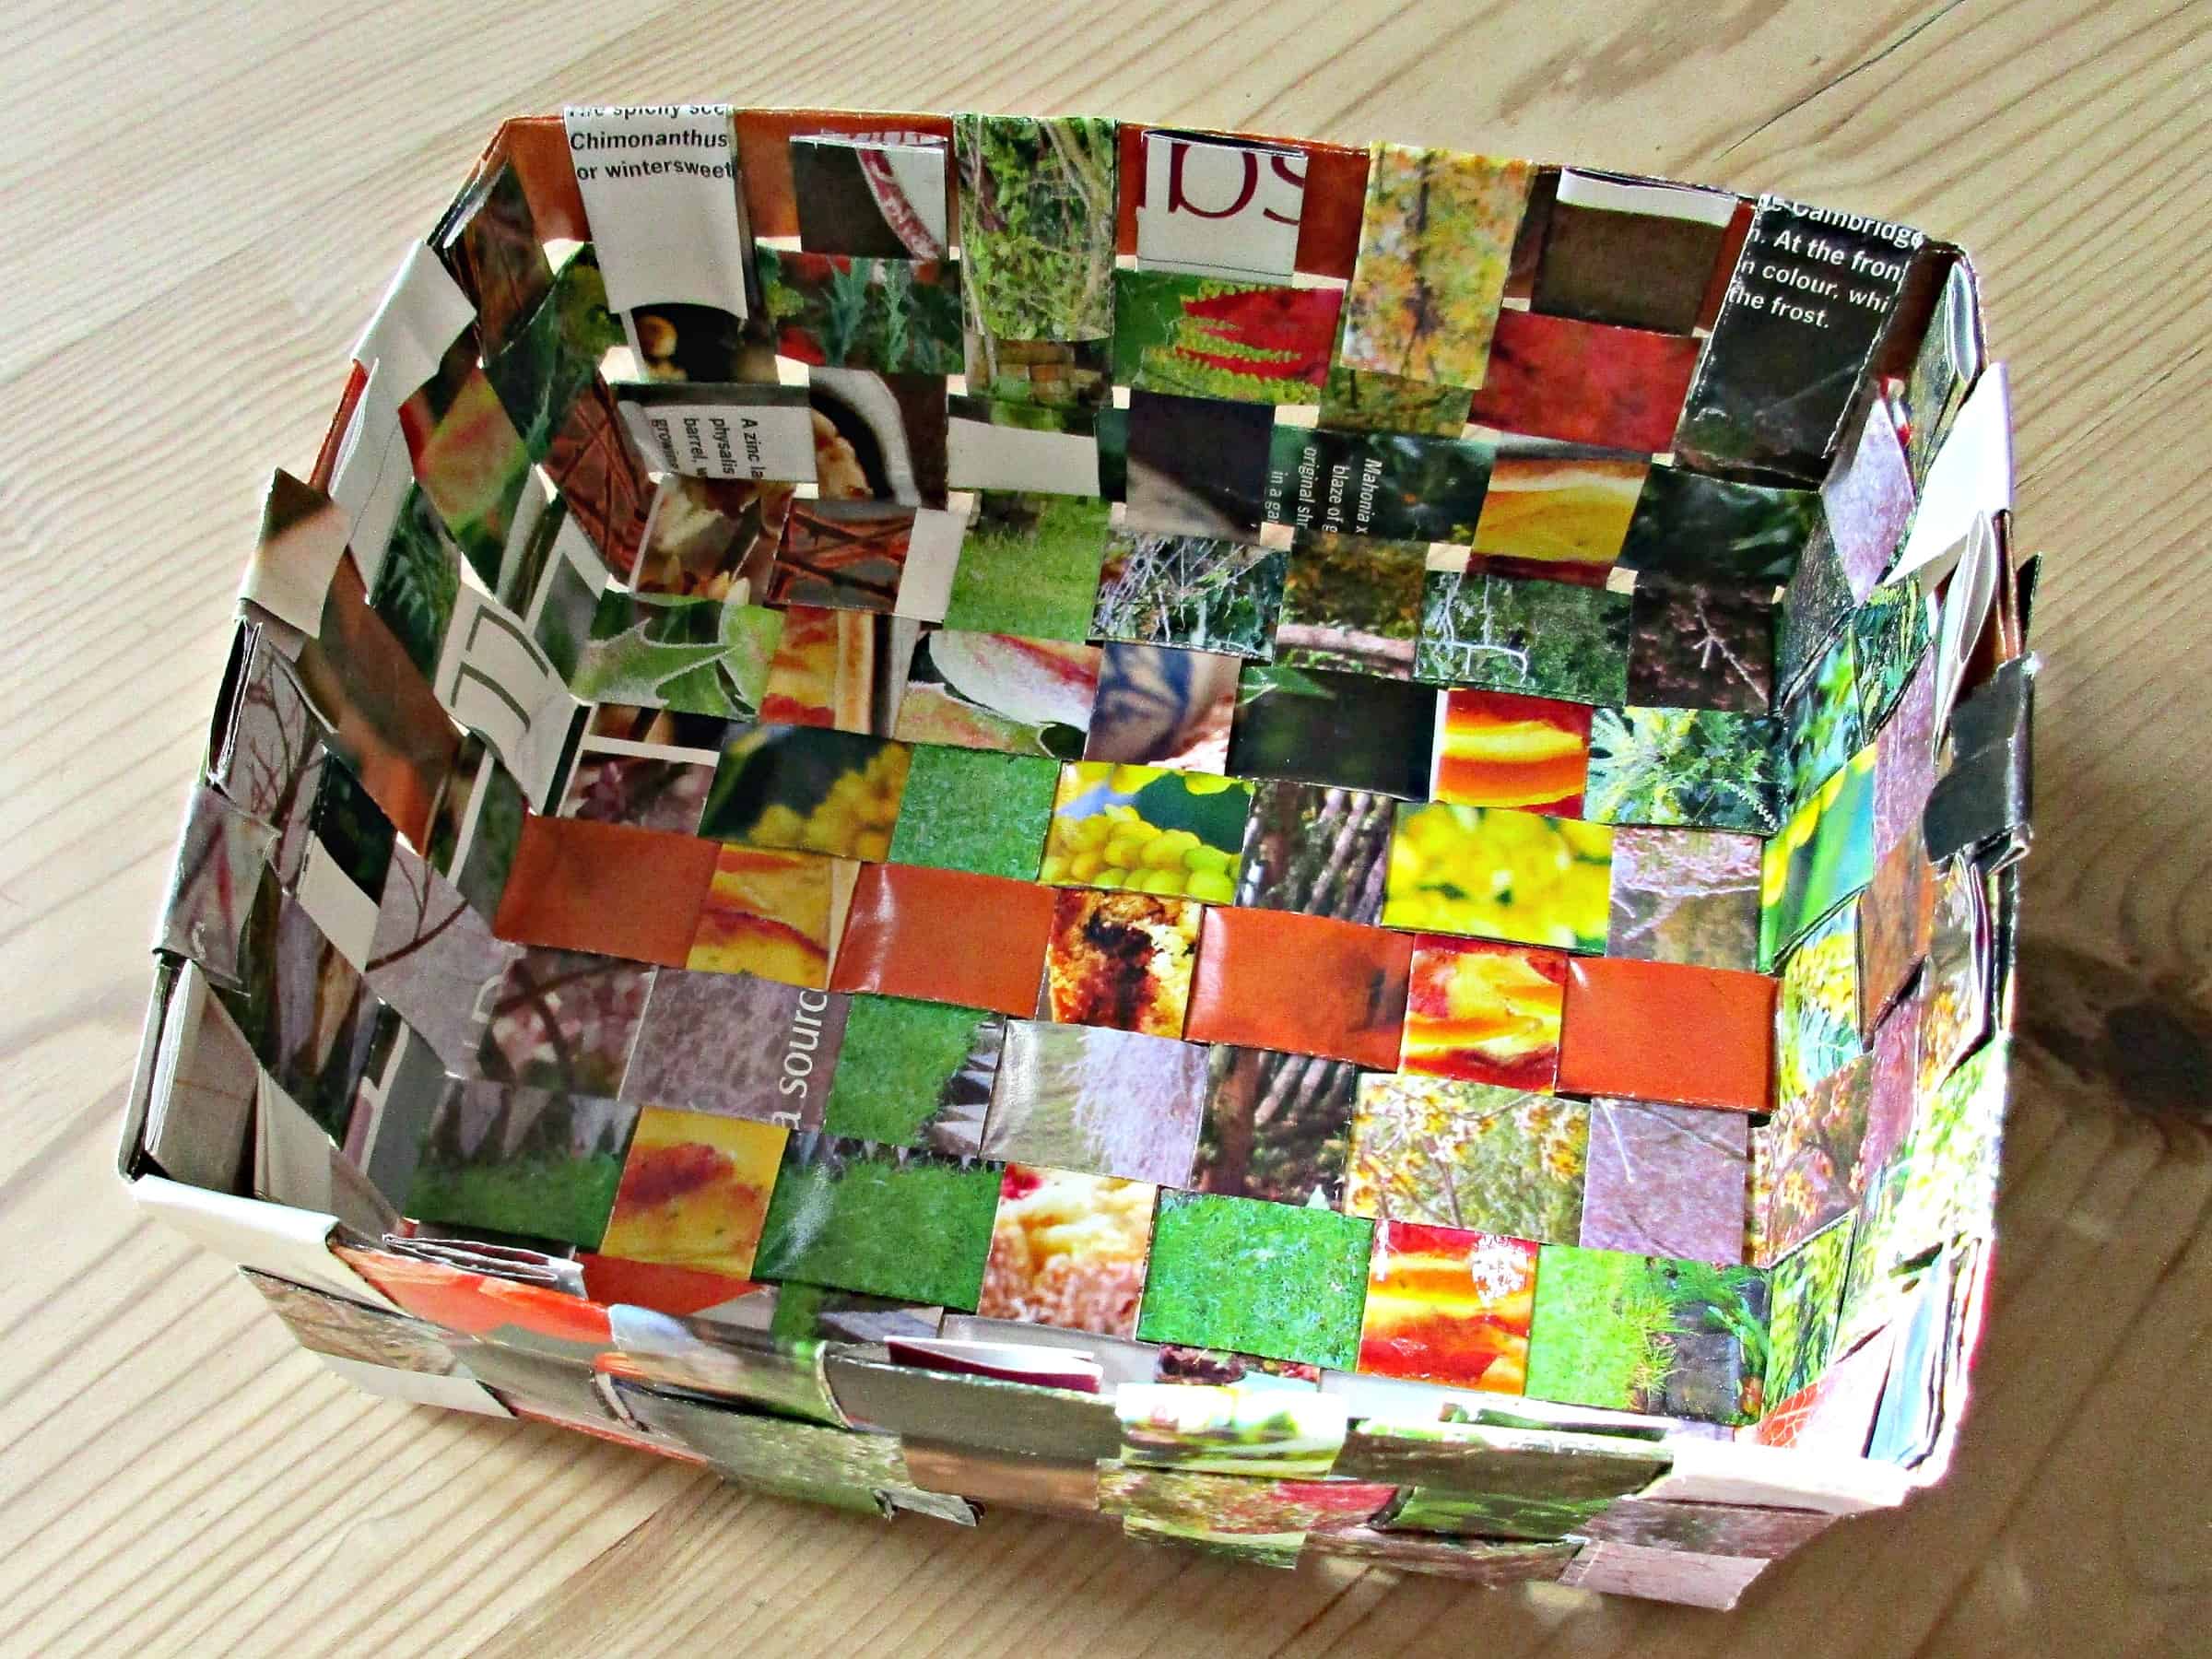 10 Recycled Crafts To Try With The Kids Recycled Magazine Basket 